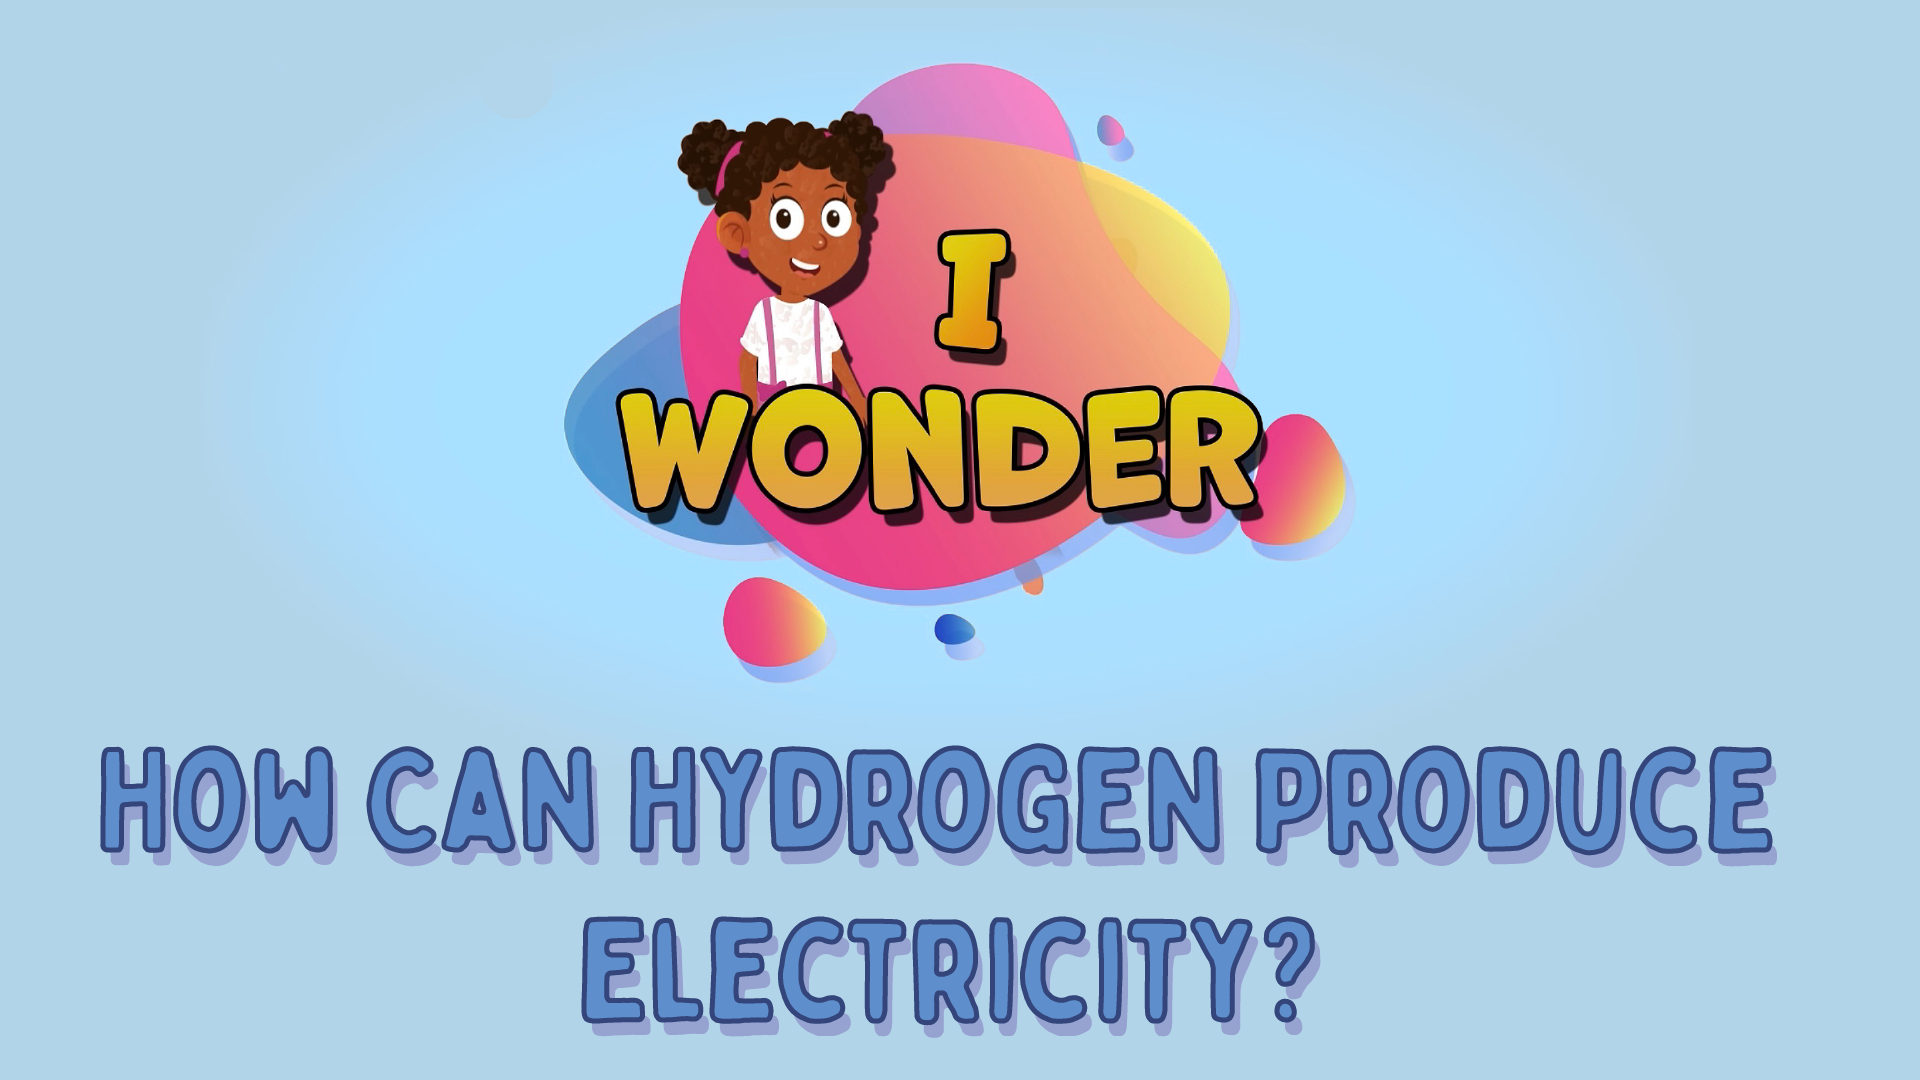 How Can Hydrogen Produce Electricity?